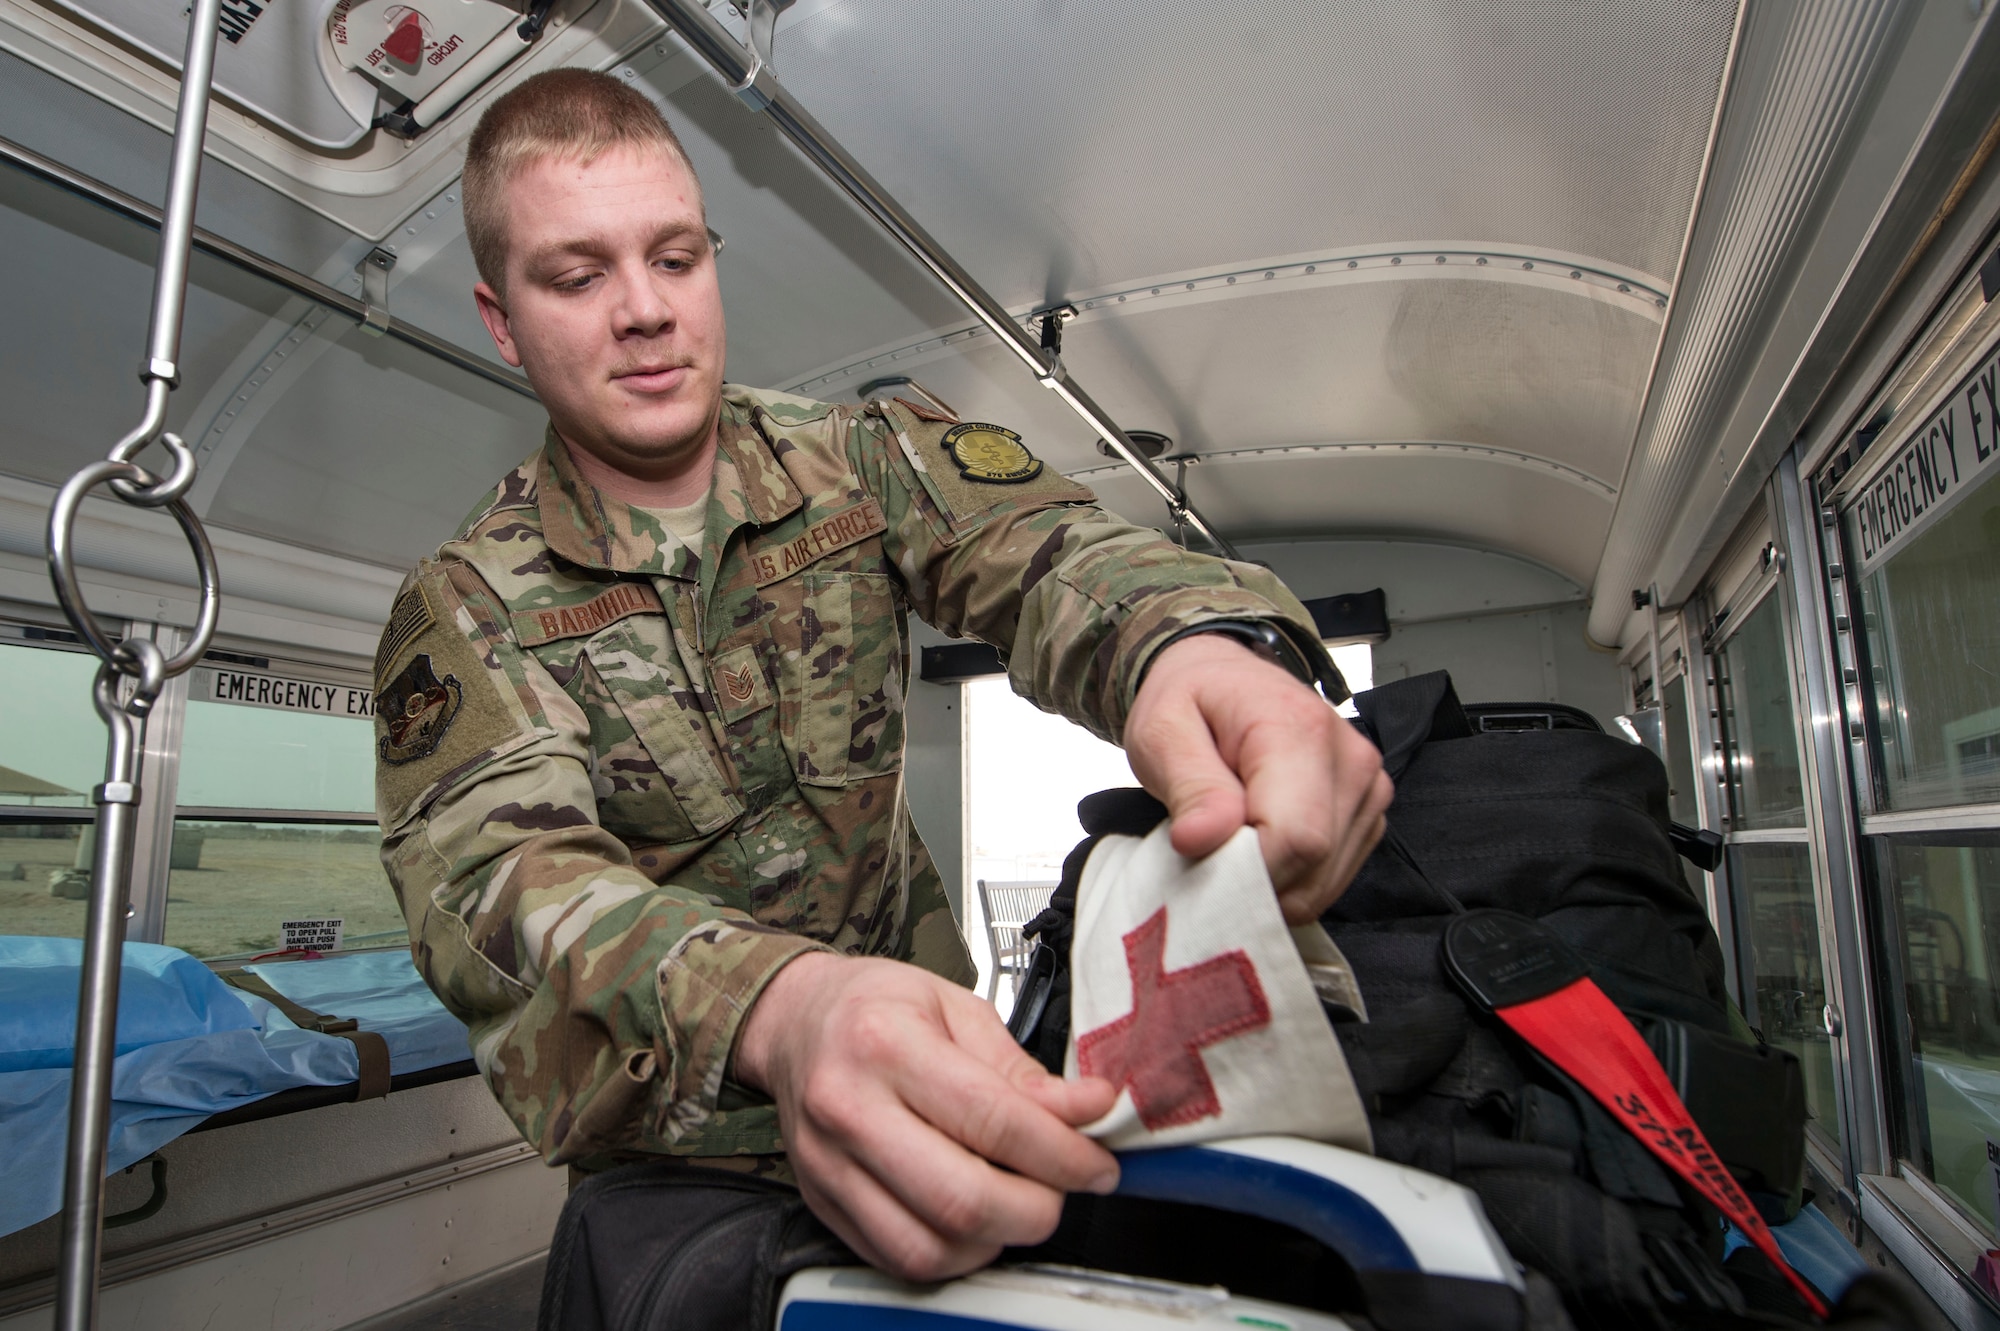 Tech. Sgt. Zachary Barnhill, 379th Expeditionary Medical Support Squadron (EMDSS) En Route Patient Staging (ERPS) Facility shift supervisor, prepares medical equipment on a bus prior to picking up patients on the flightline at Al Udeid Air Base, Qatar, Feb. 27, 2019. Airmen at the 379th EMDSS’s ERPS facility work at both the clinic and on the flightline to ensure safe transport and care is provided to in-transit patients during their stay at Al Udeid before they are moved to locations supporting higher levels of medical treatment, if necessary. (U.S. Air Force photo by Tech. Sgt. Christopher Hubenthal)